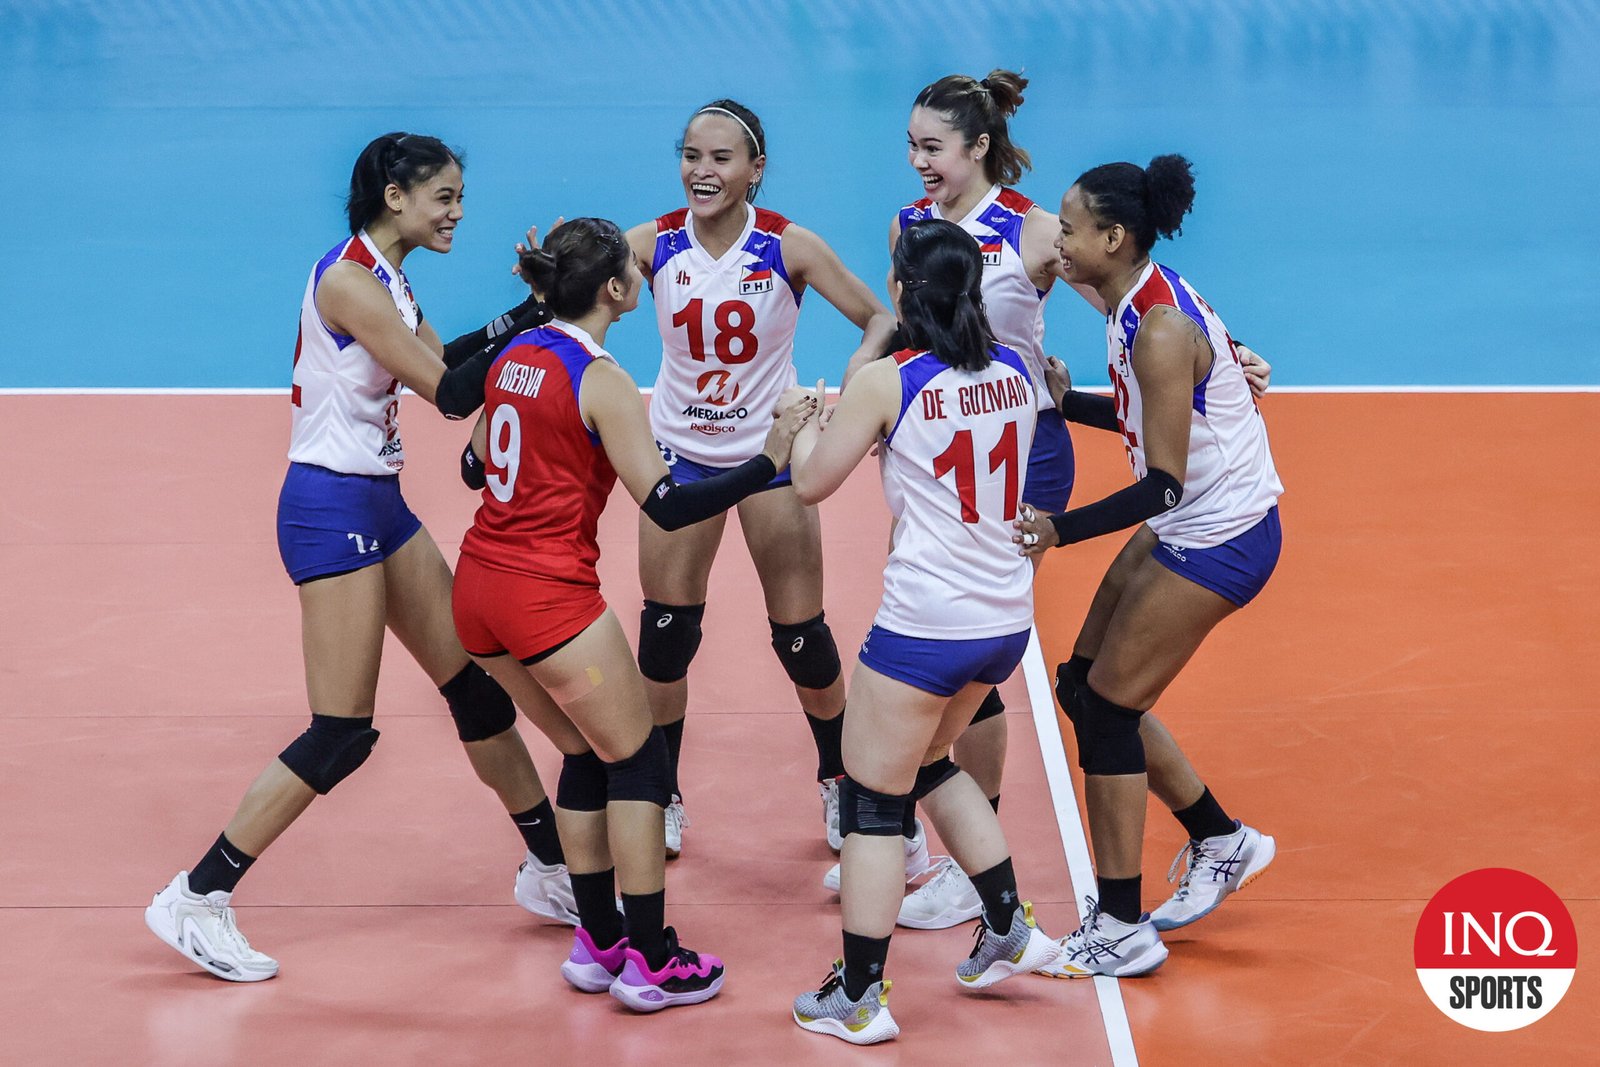 For just P15,000 each to play, Alas Pilipinas earns fans’ hearts